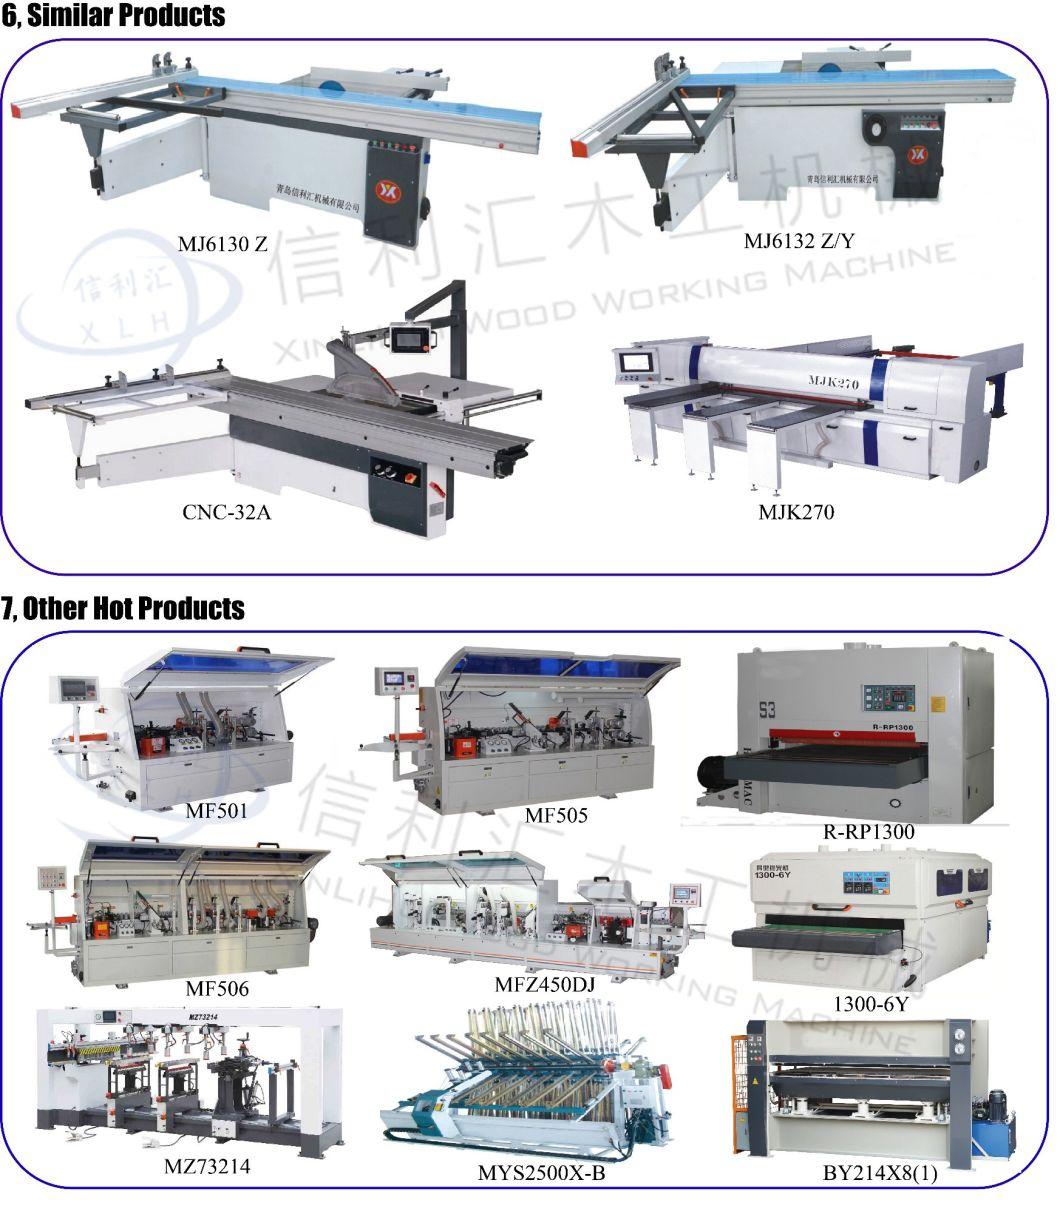 China Auto Equipment for The Production of Wooden Pallets Wooden Pallet Making Equipment, Wood Board/Timber Pallet Nailing Machine